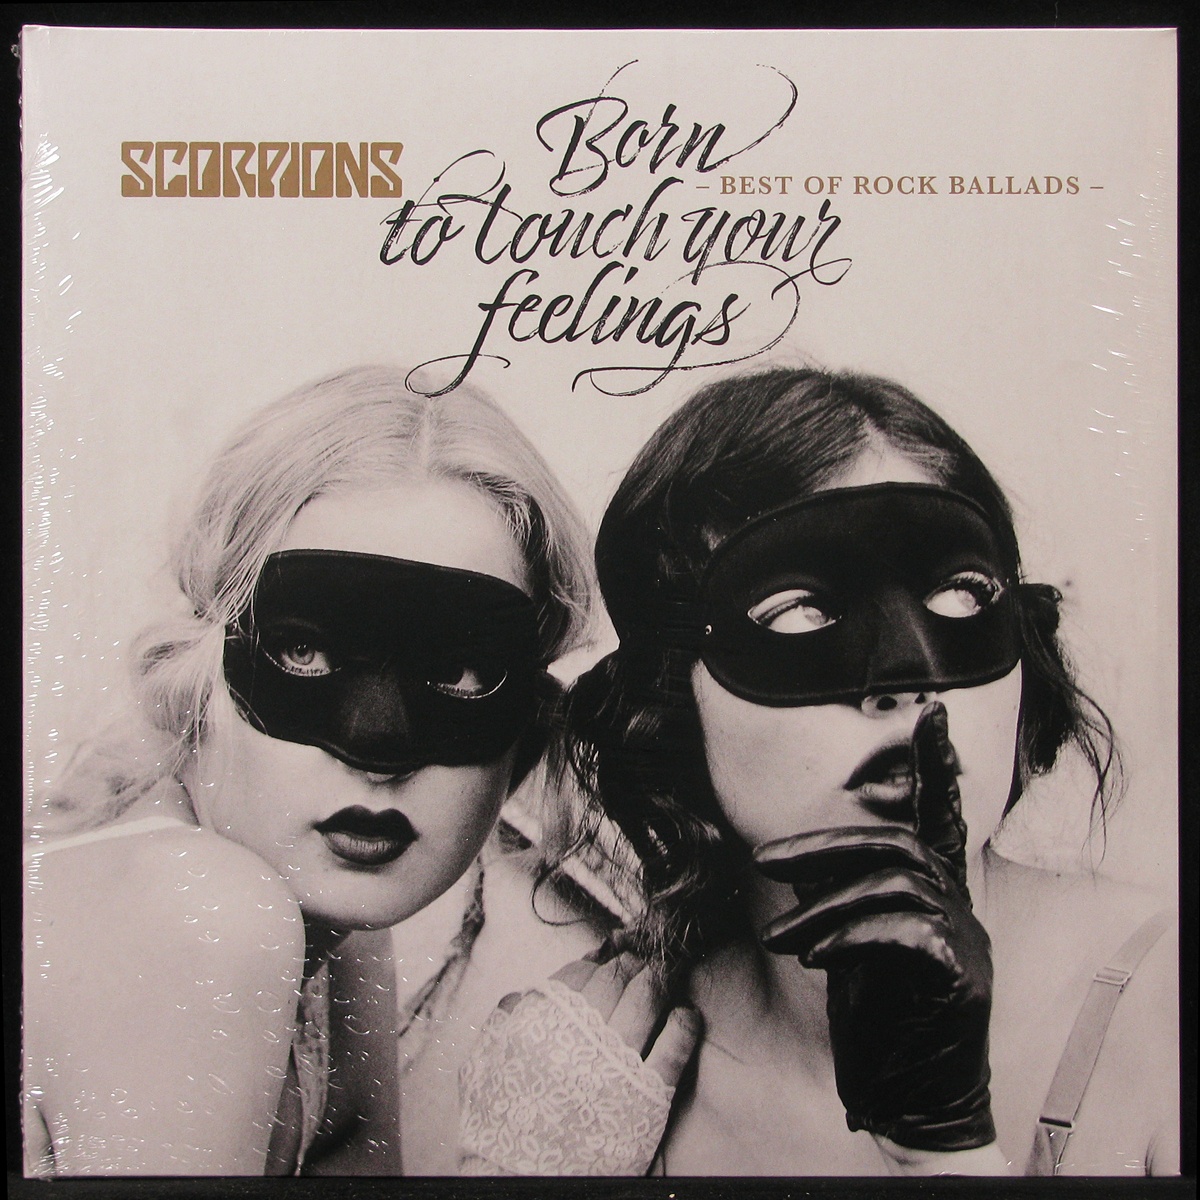 LP Scorpions — Born To Touch Your Feelings - Best Of Rock Ballads (2LP) фото